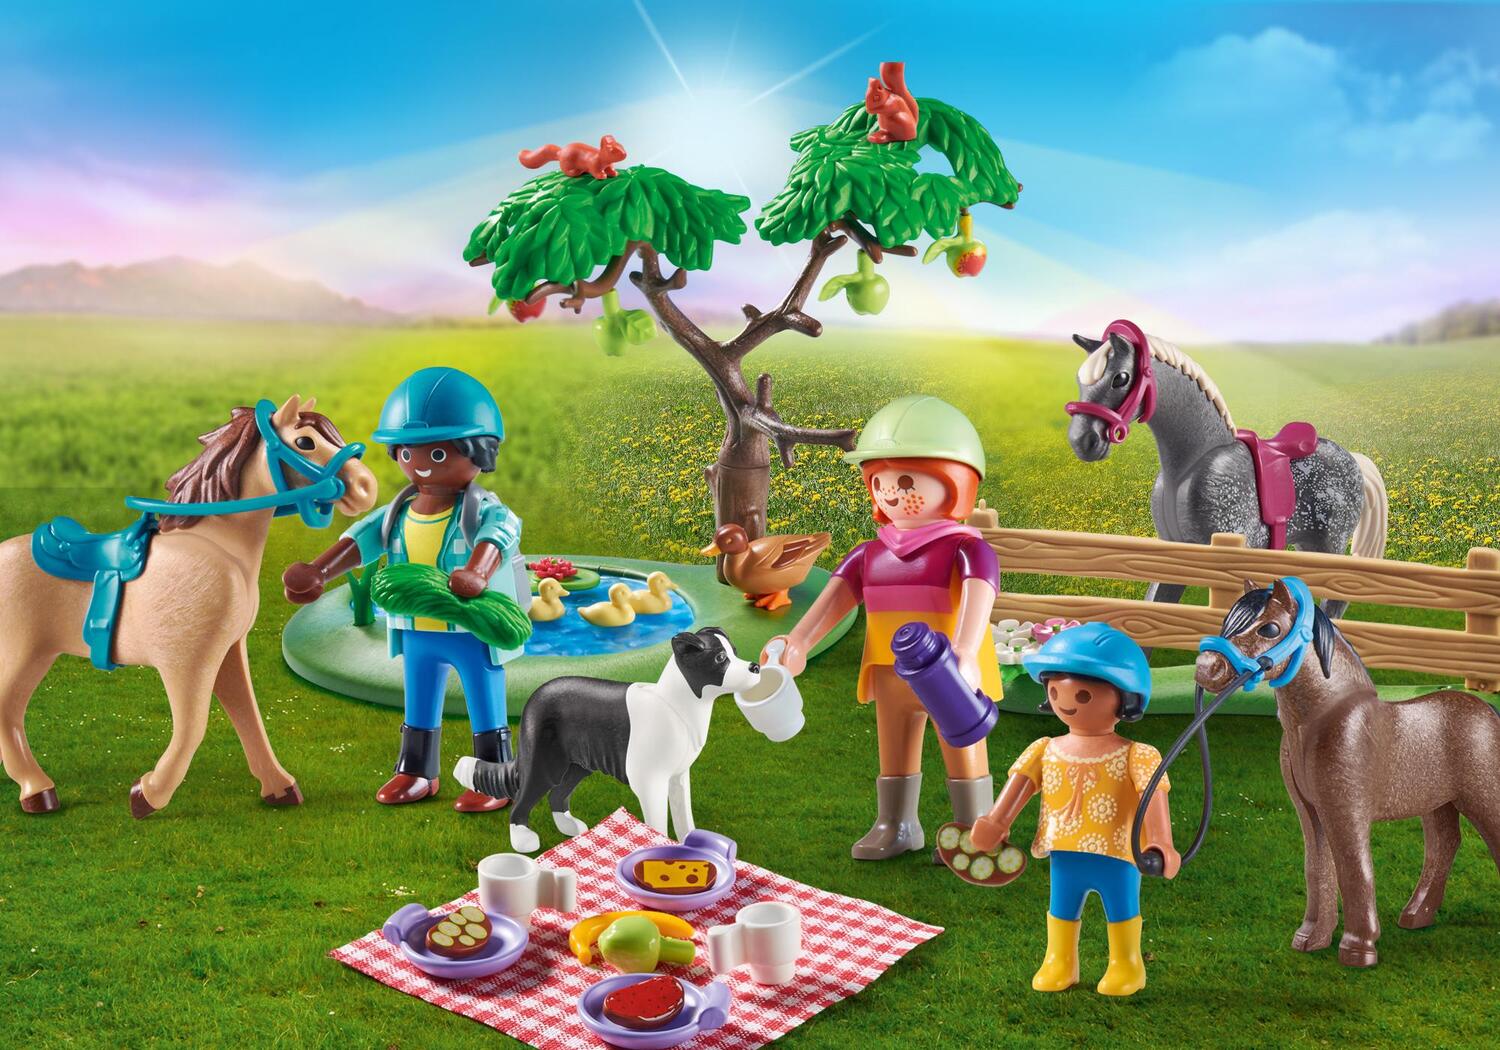  Playmobil Horse with Foal : Toys & Games